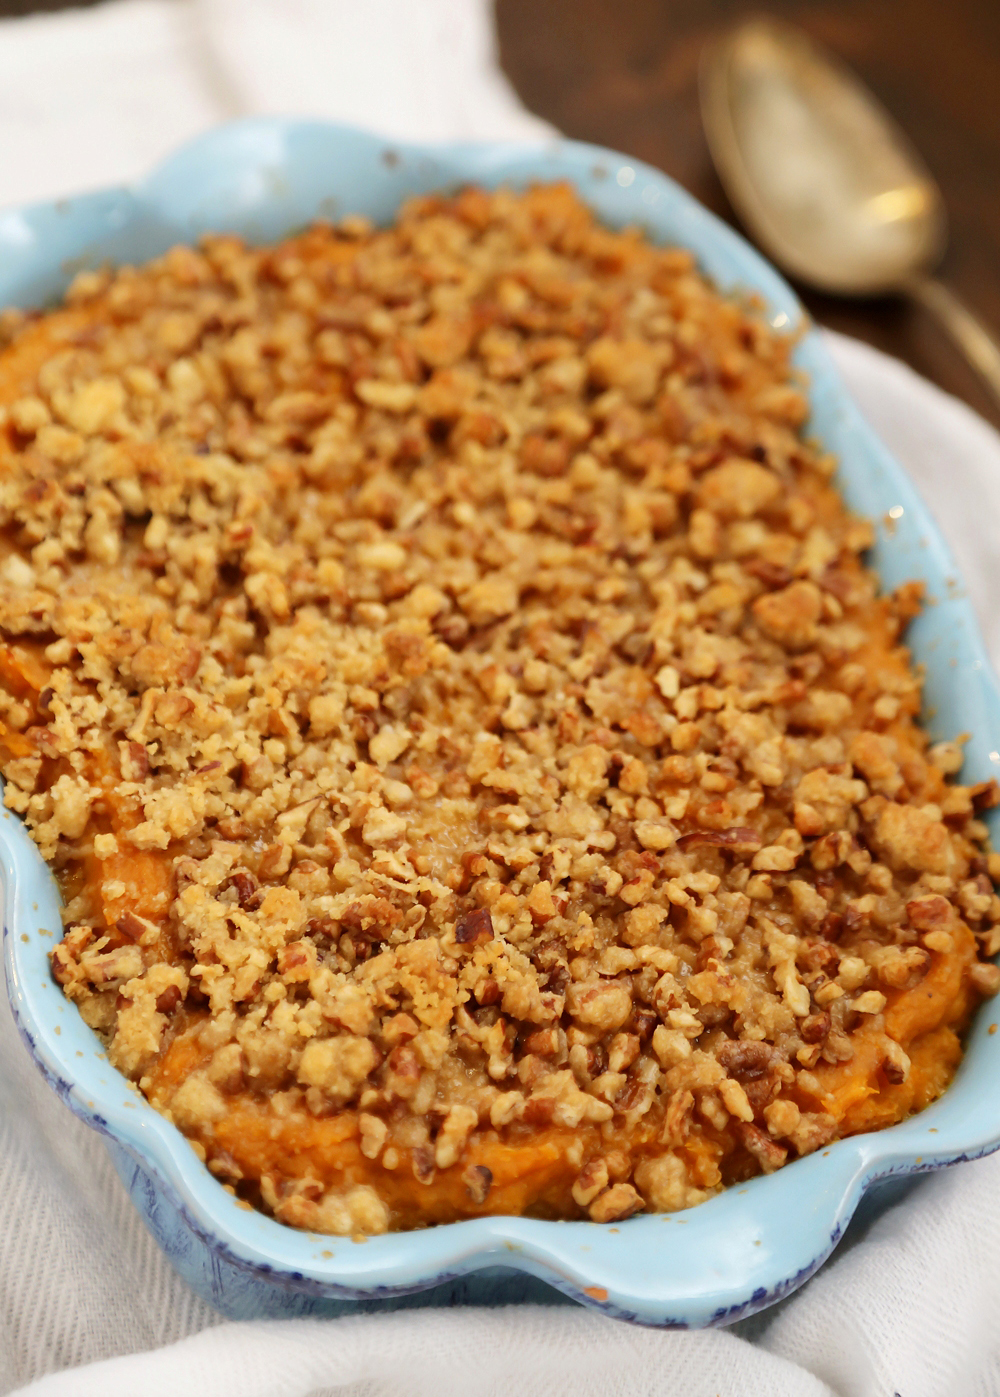 Buttery Brown Sugar Sweet Potato Casserole - Creamy, smooth sweet potato side with streusel topping is easy + sure to hit the spot for holiday feasting! thecomfortofcooking.com